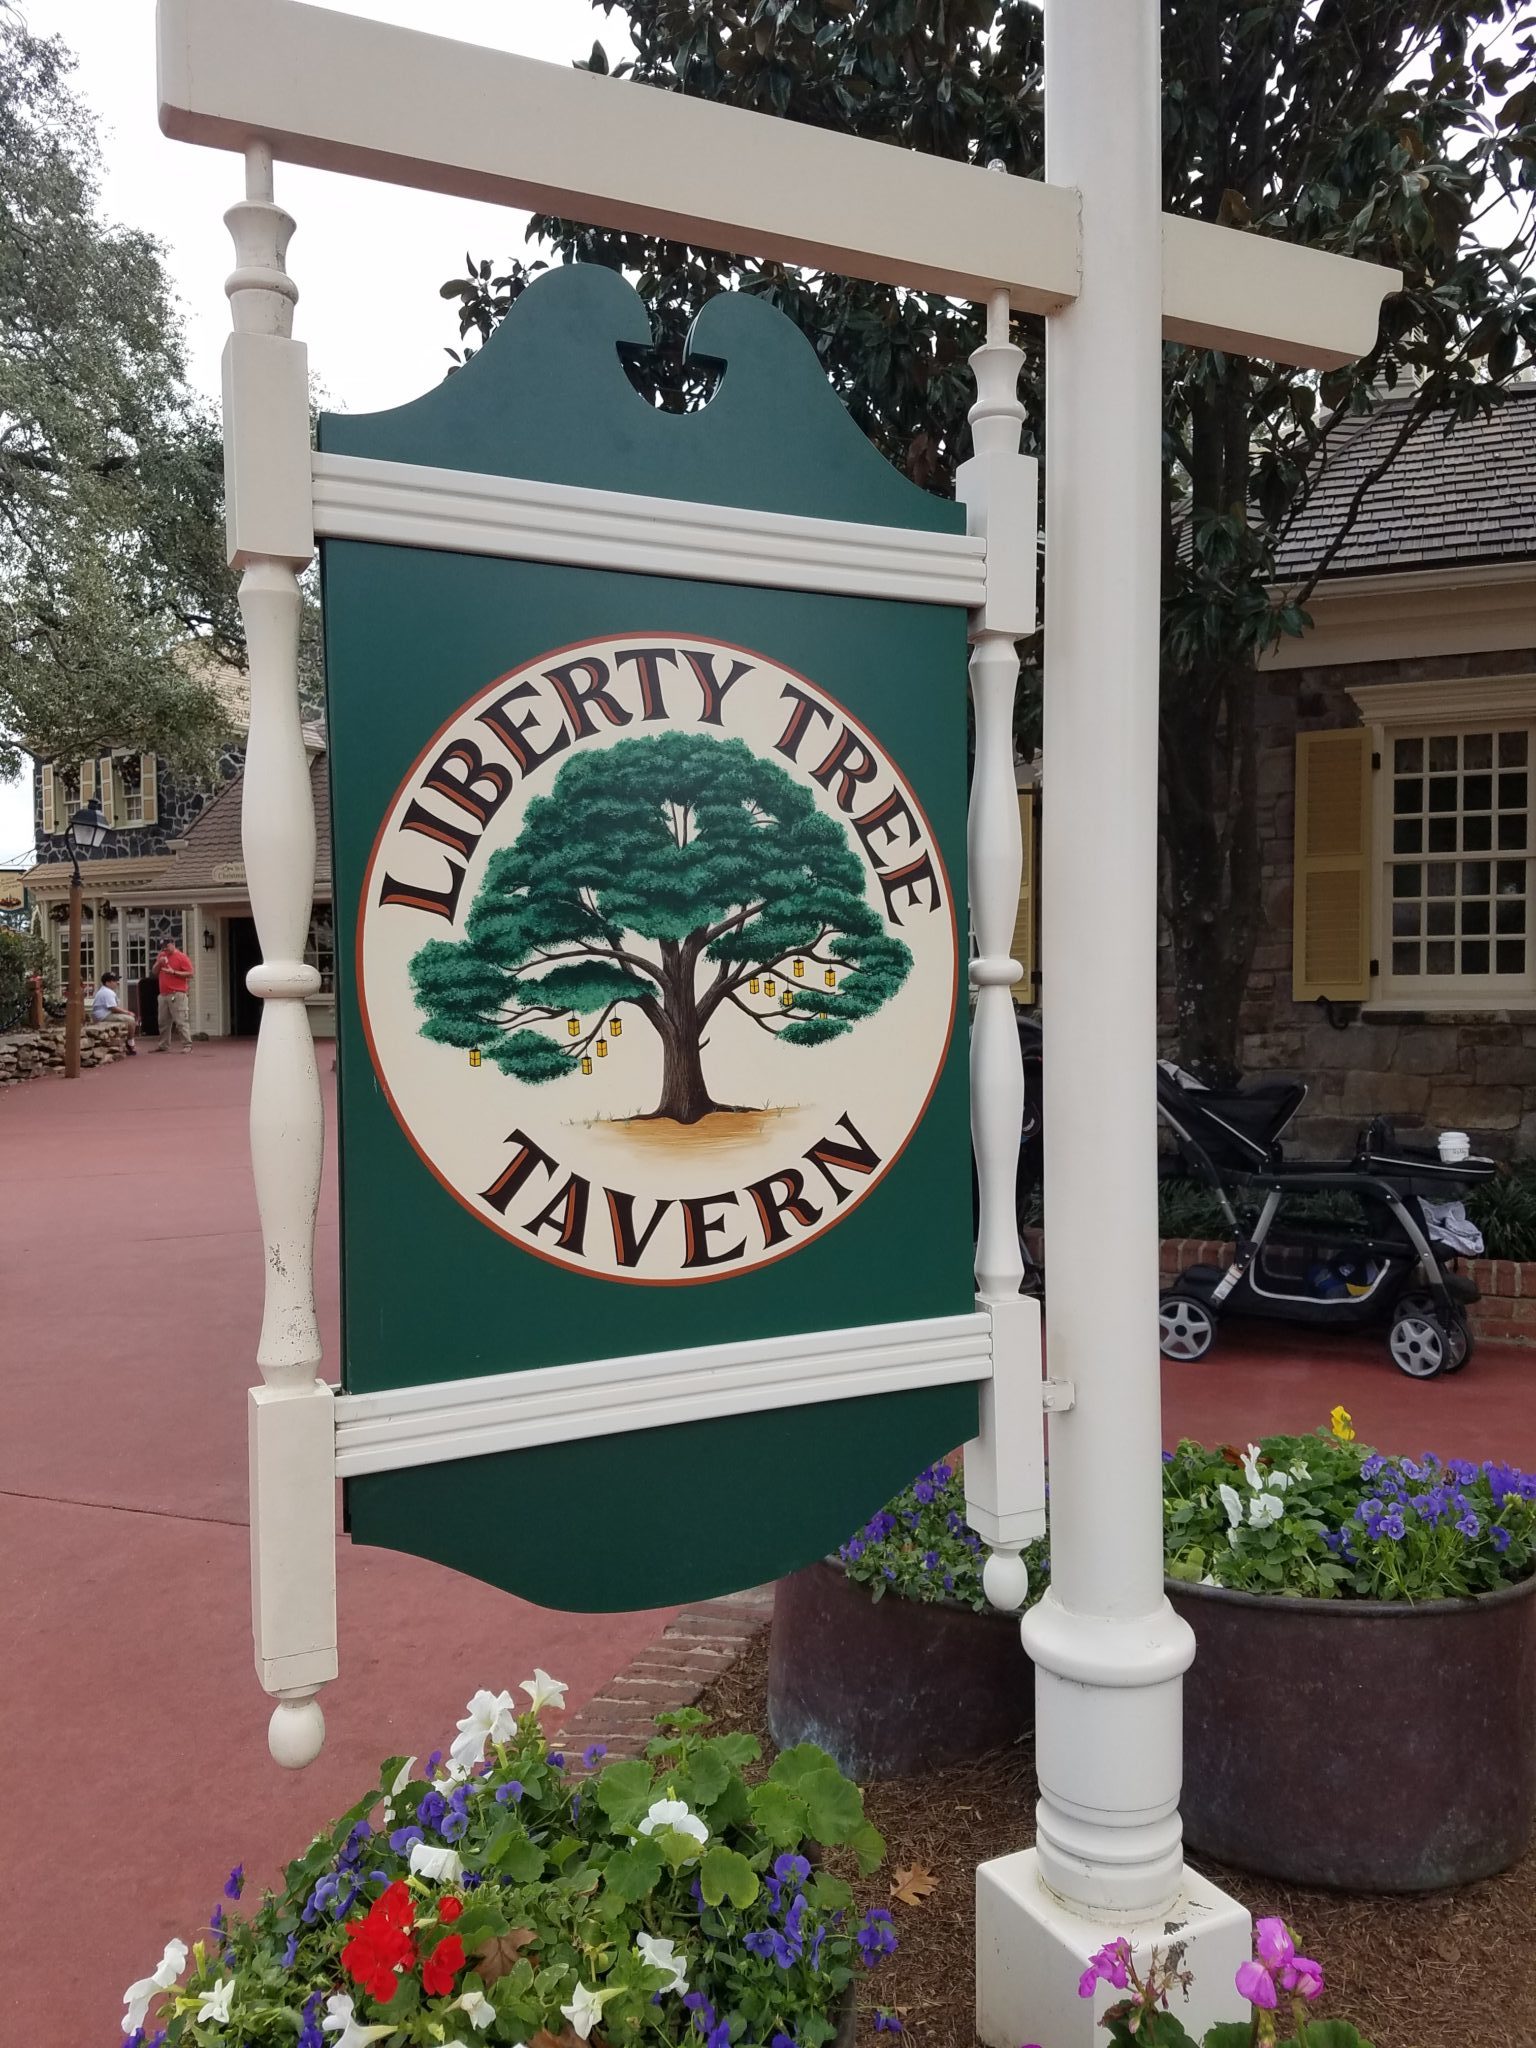 Liberty Tree Tavern Menu Brings Some of your Lunch Favorites Back